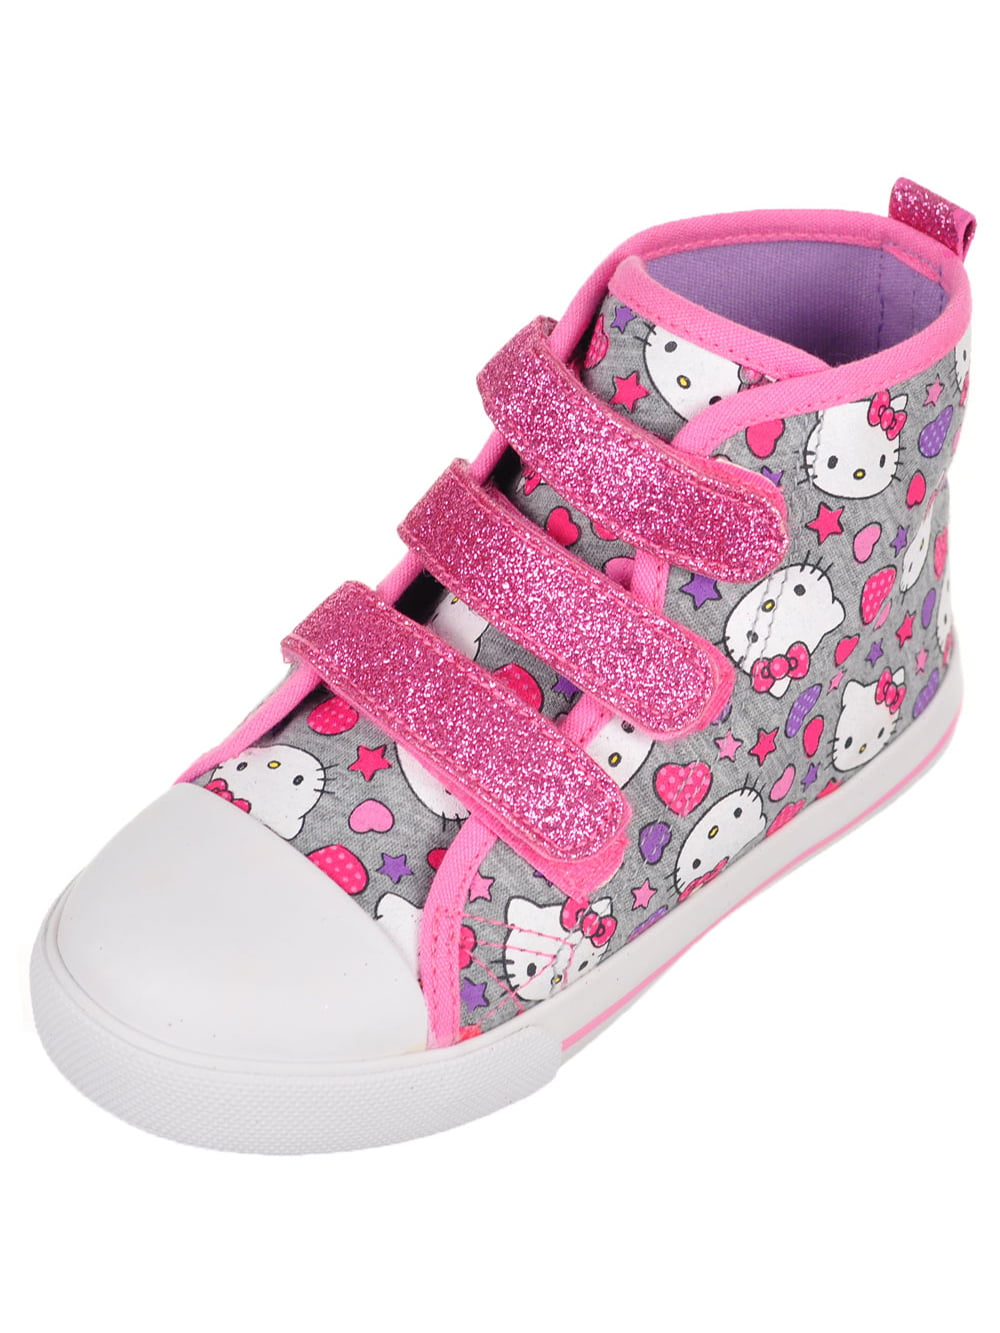 Hello Kitty Lil Avery Hi-Top Sneakers